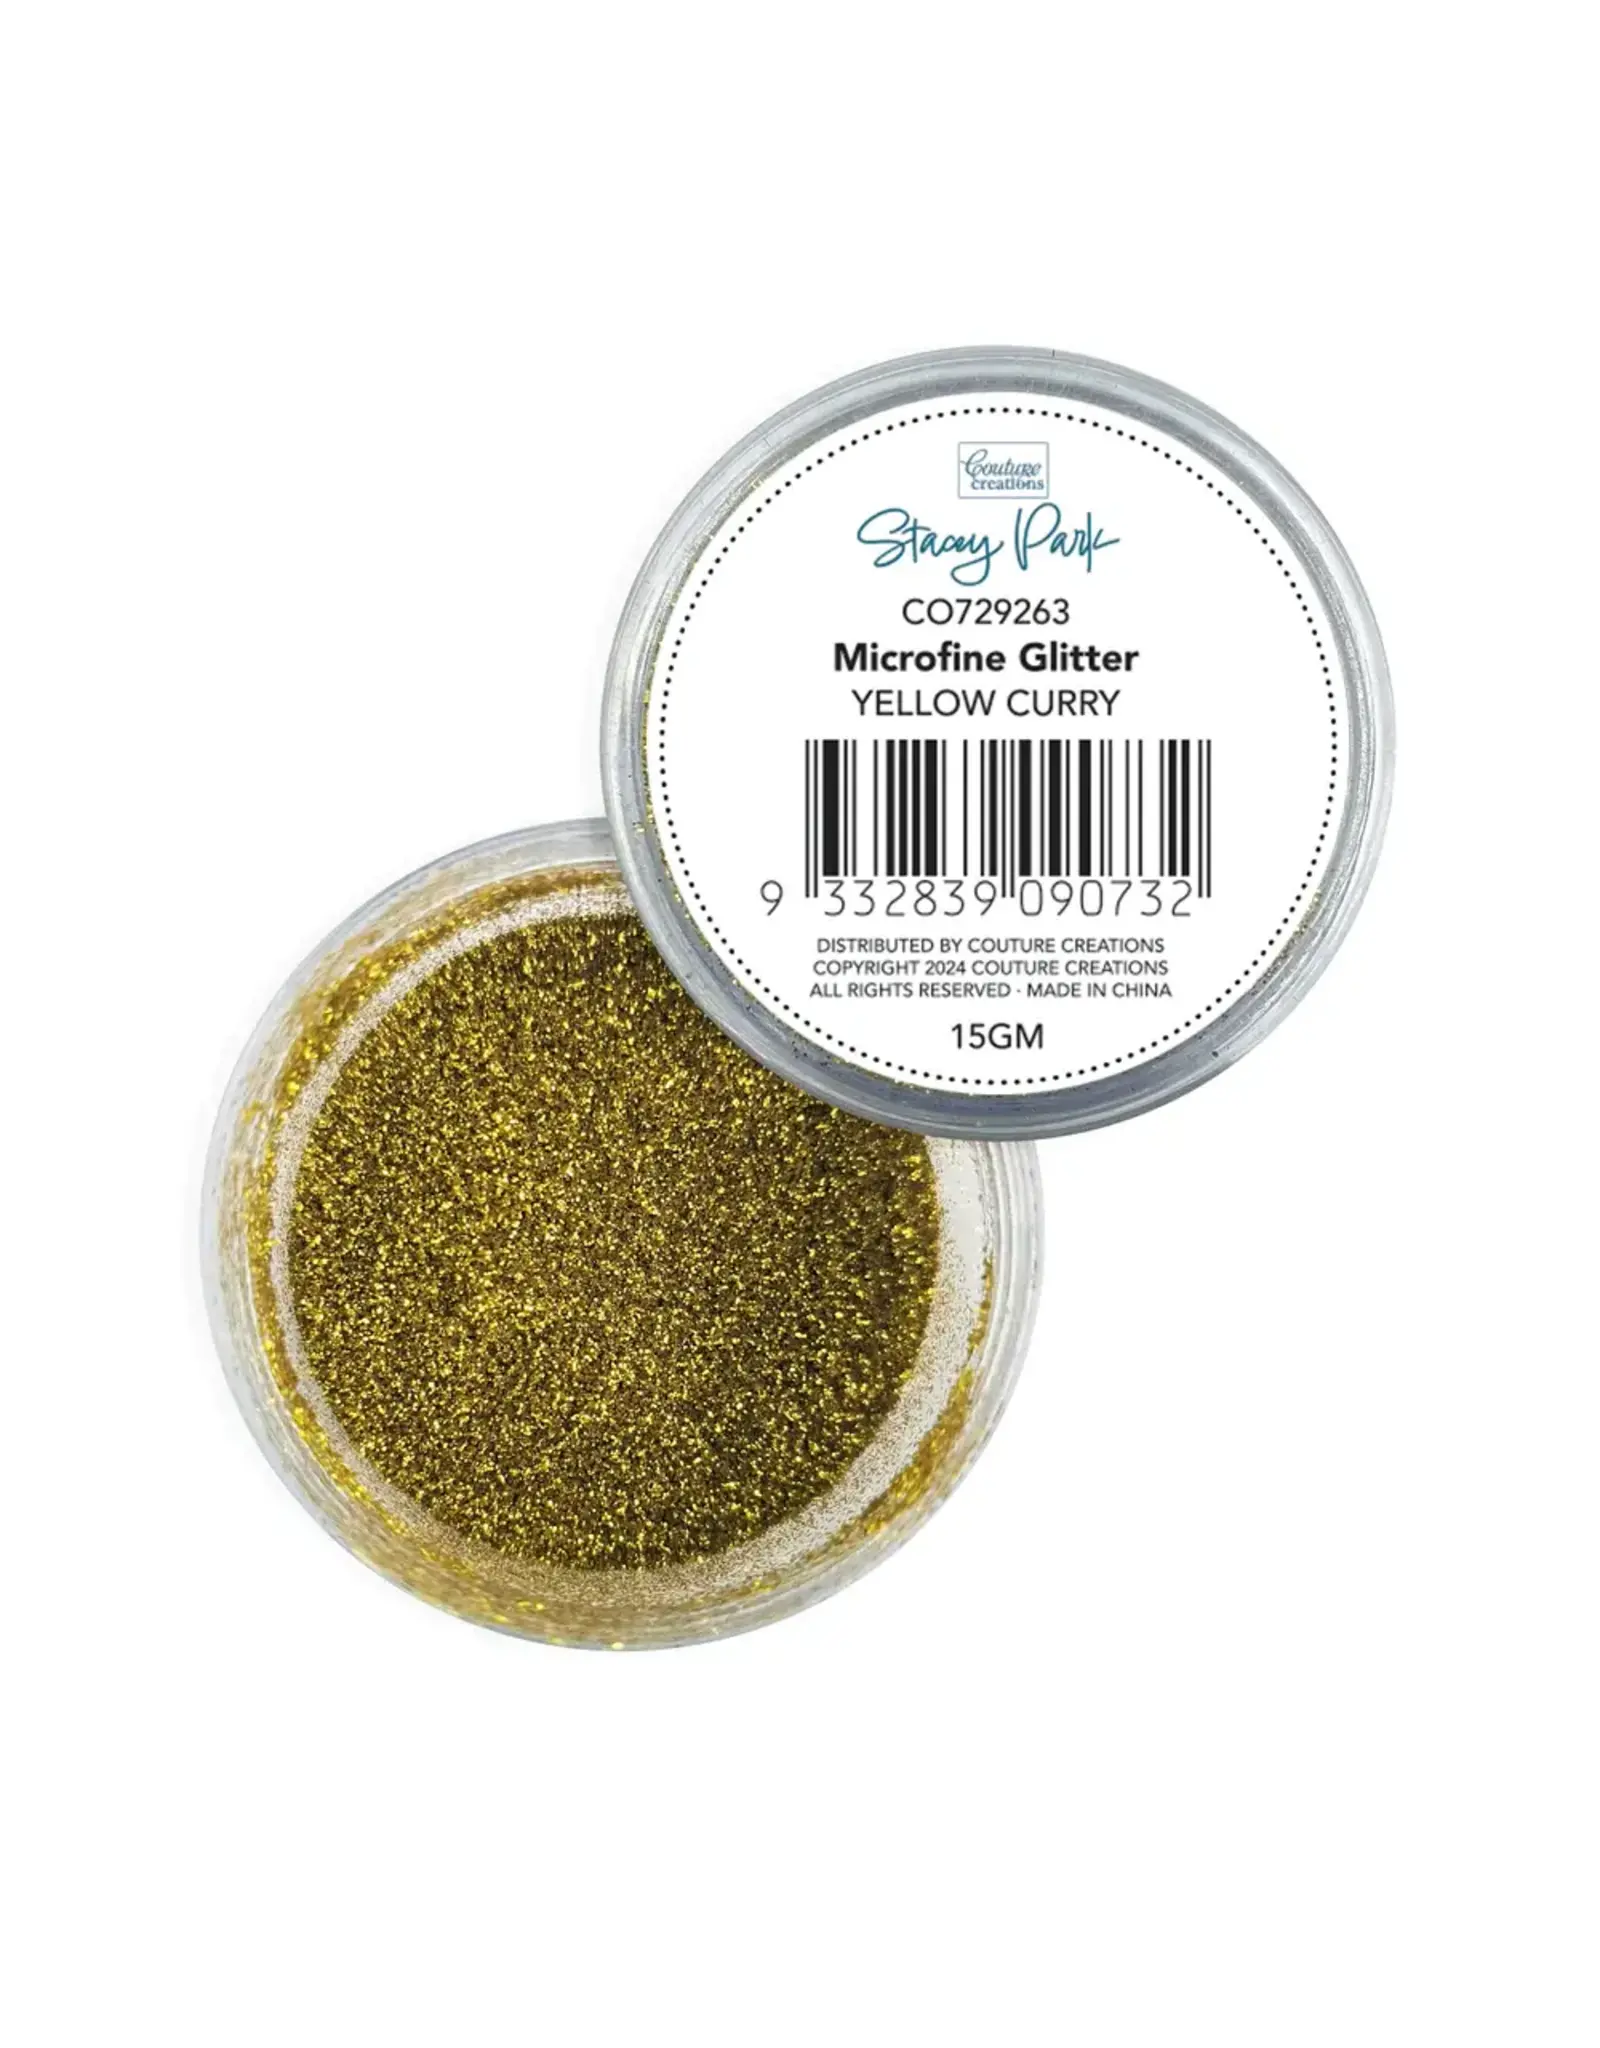 COUTURE CREATIONS COUTURE CREATIONS STACEY PARK YELLOW CURRY MICROFINE GLITTER